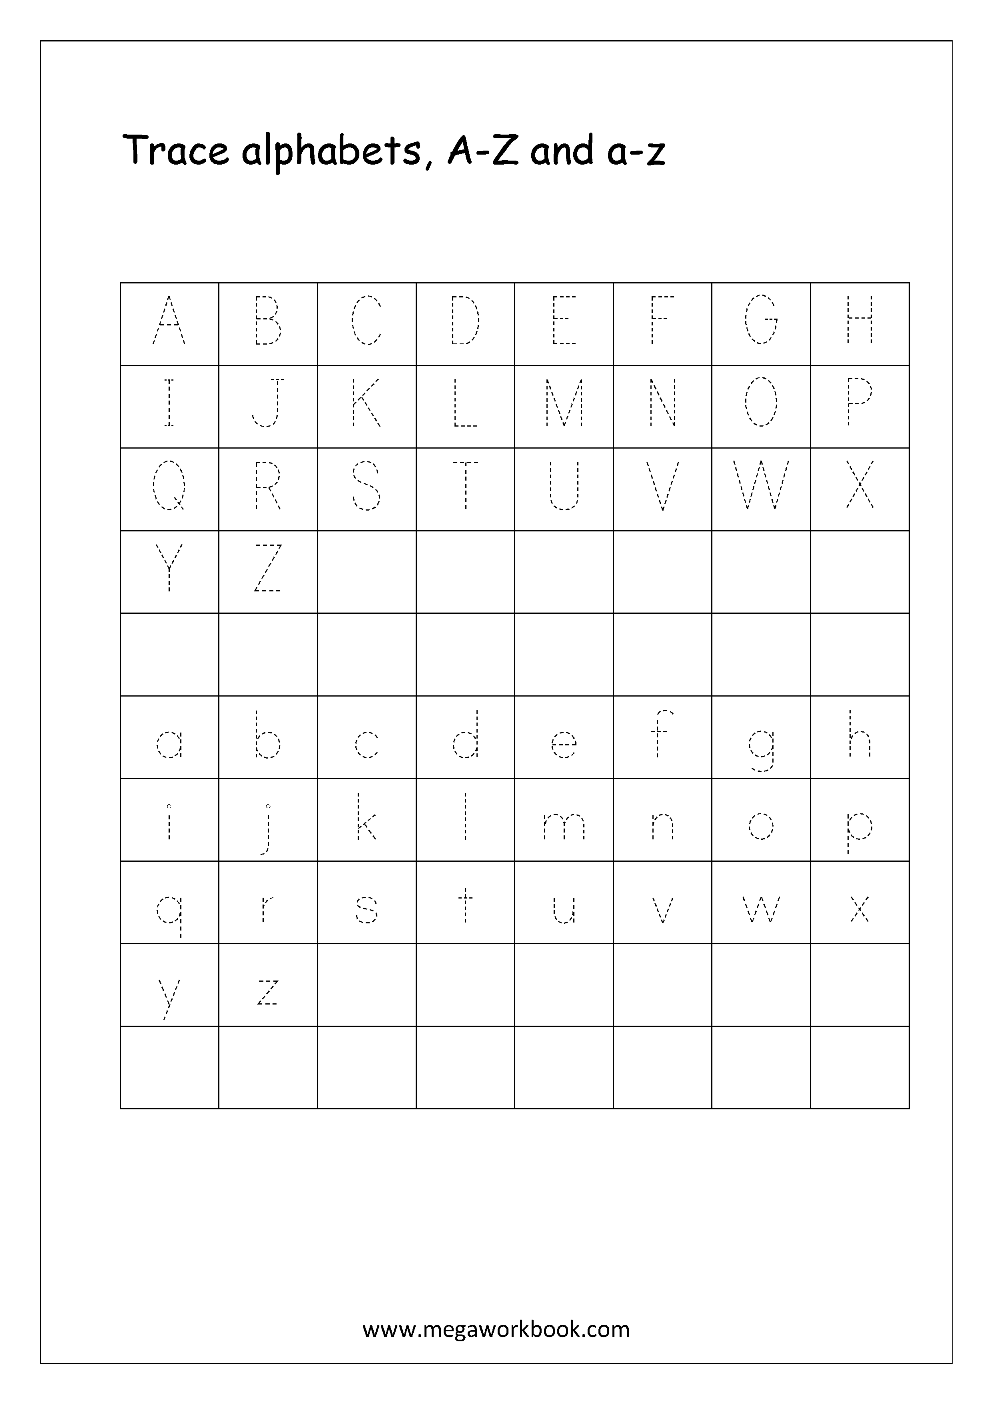 Free English Worksheets - Alphabet Tracing (Small Letters  worksheets for teachers, printable worksheets, multiplication, free worksheets, and math worksheets Tracing Letters A Z Worksheet 1403 x 992